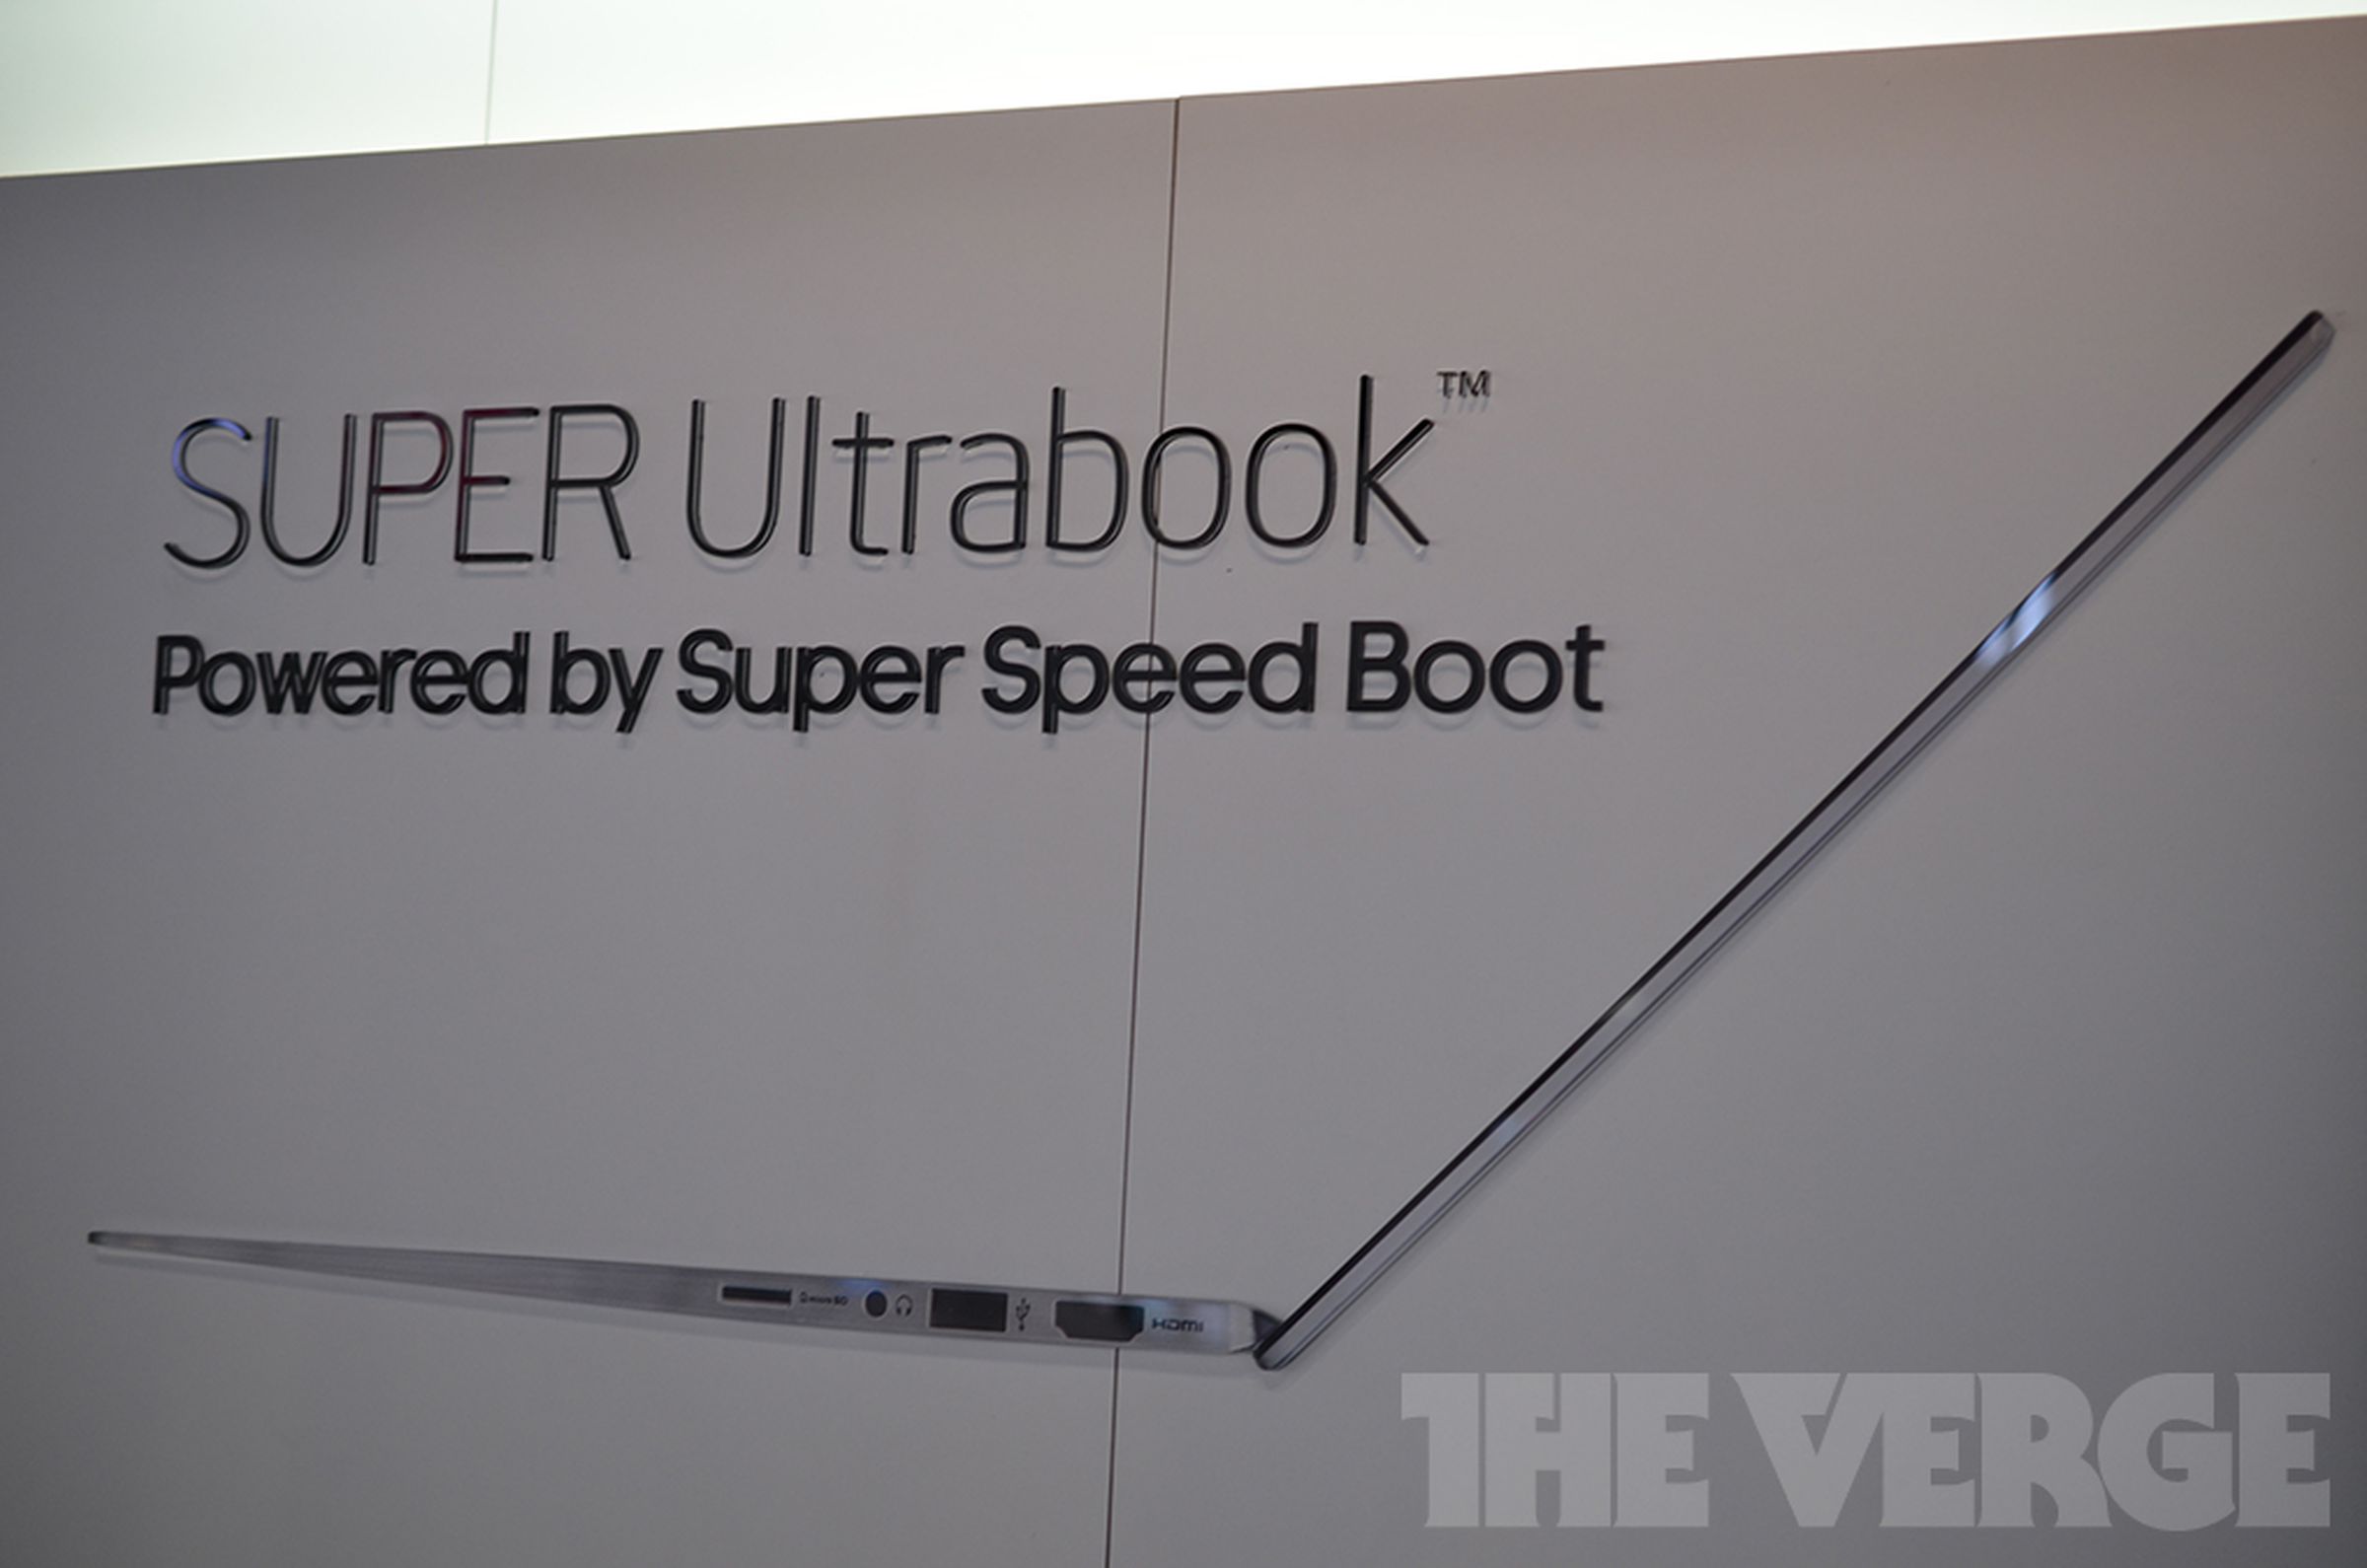 LG Z330 and Z430 ultrabook hands-on photos